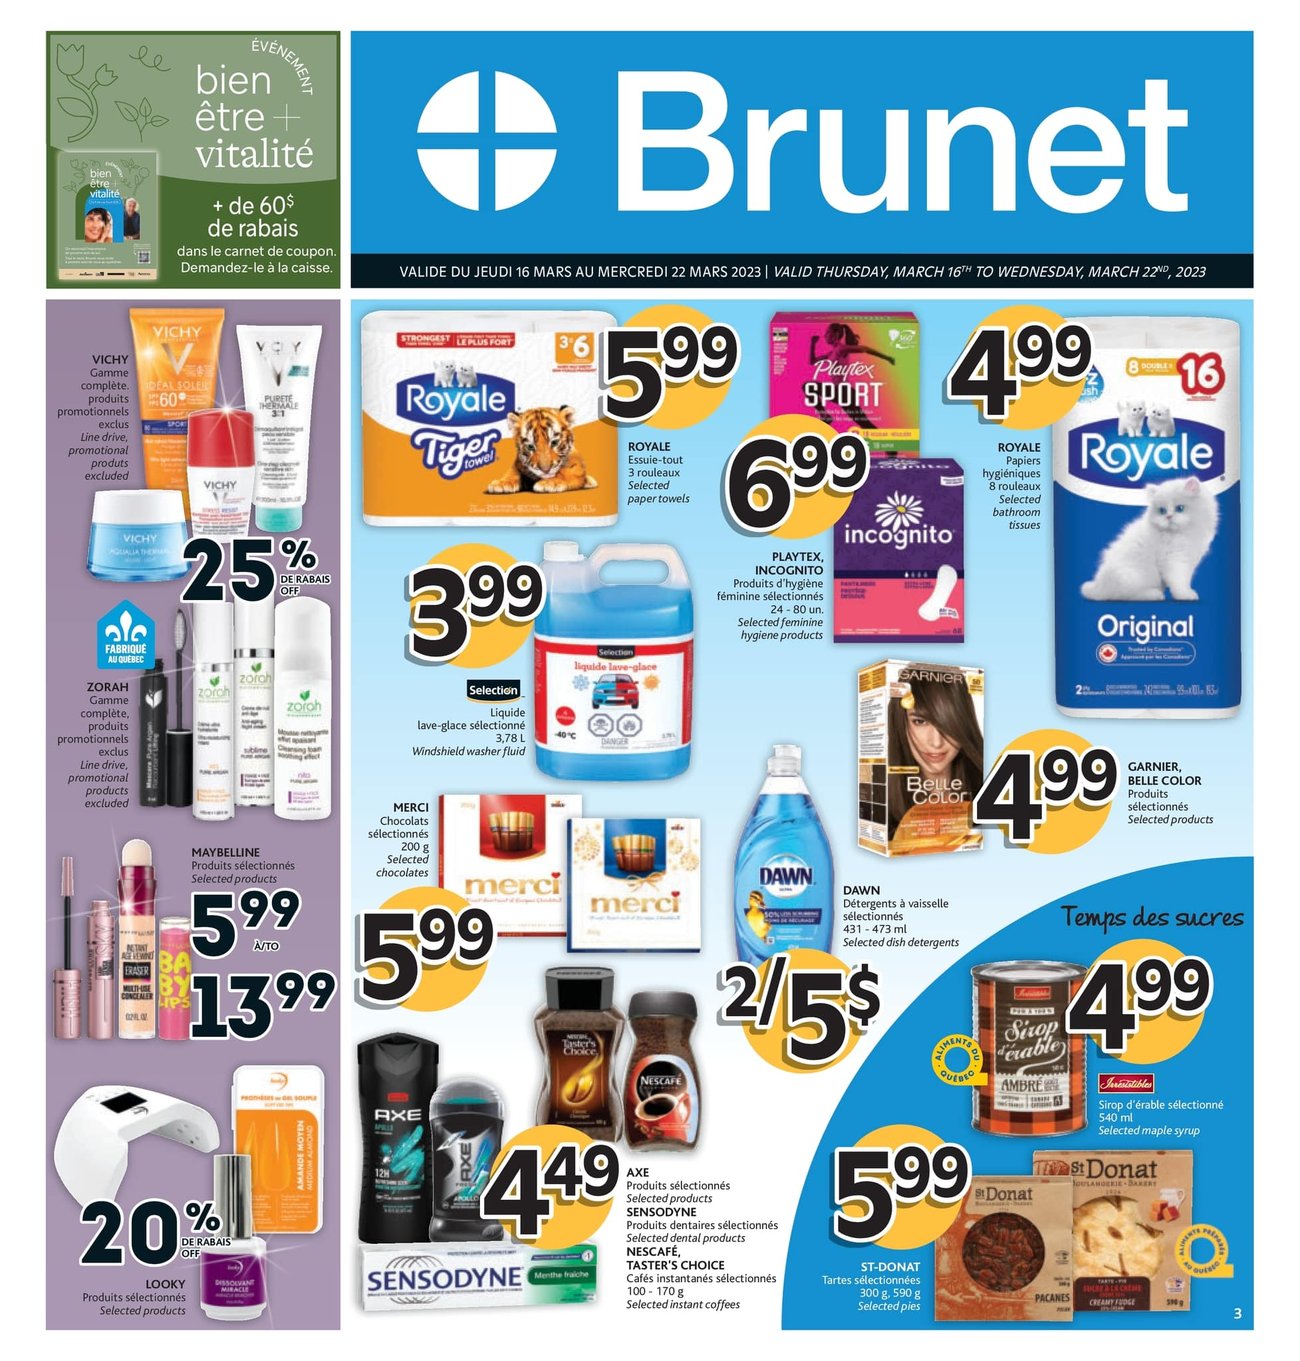 Brunet - Weekly Flyer Specials - Page 1